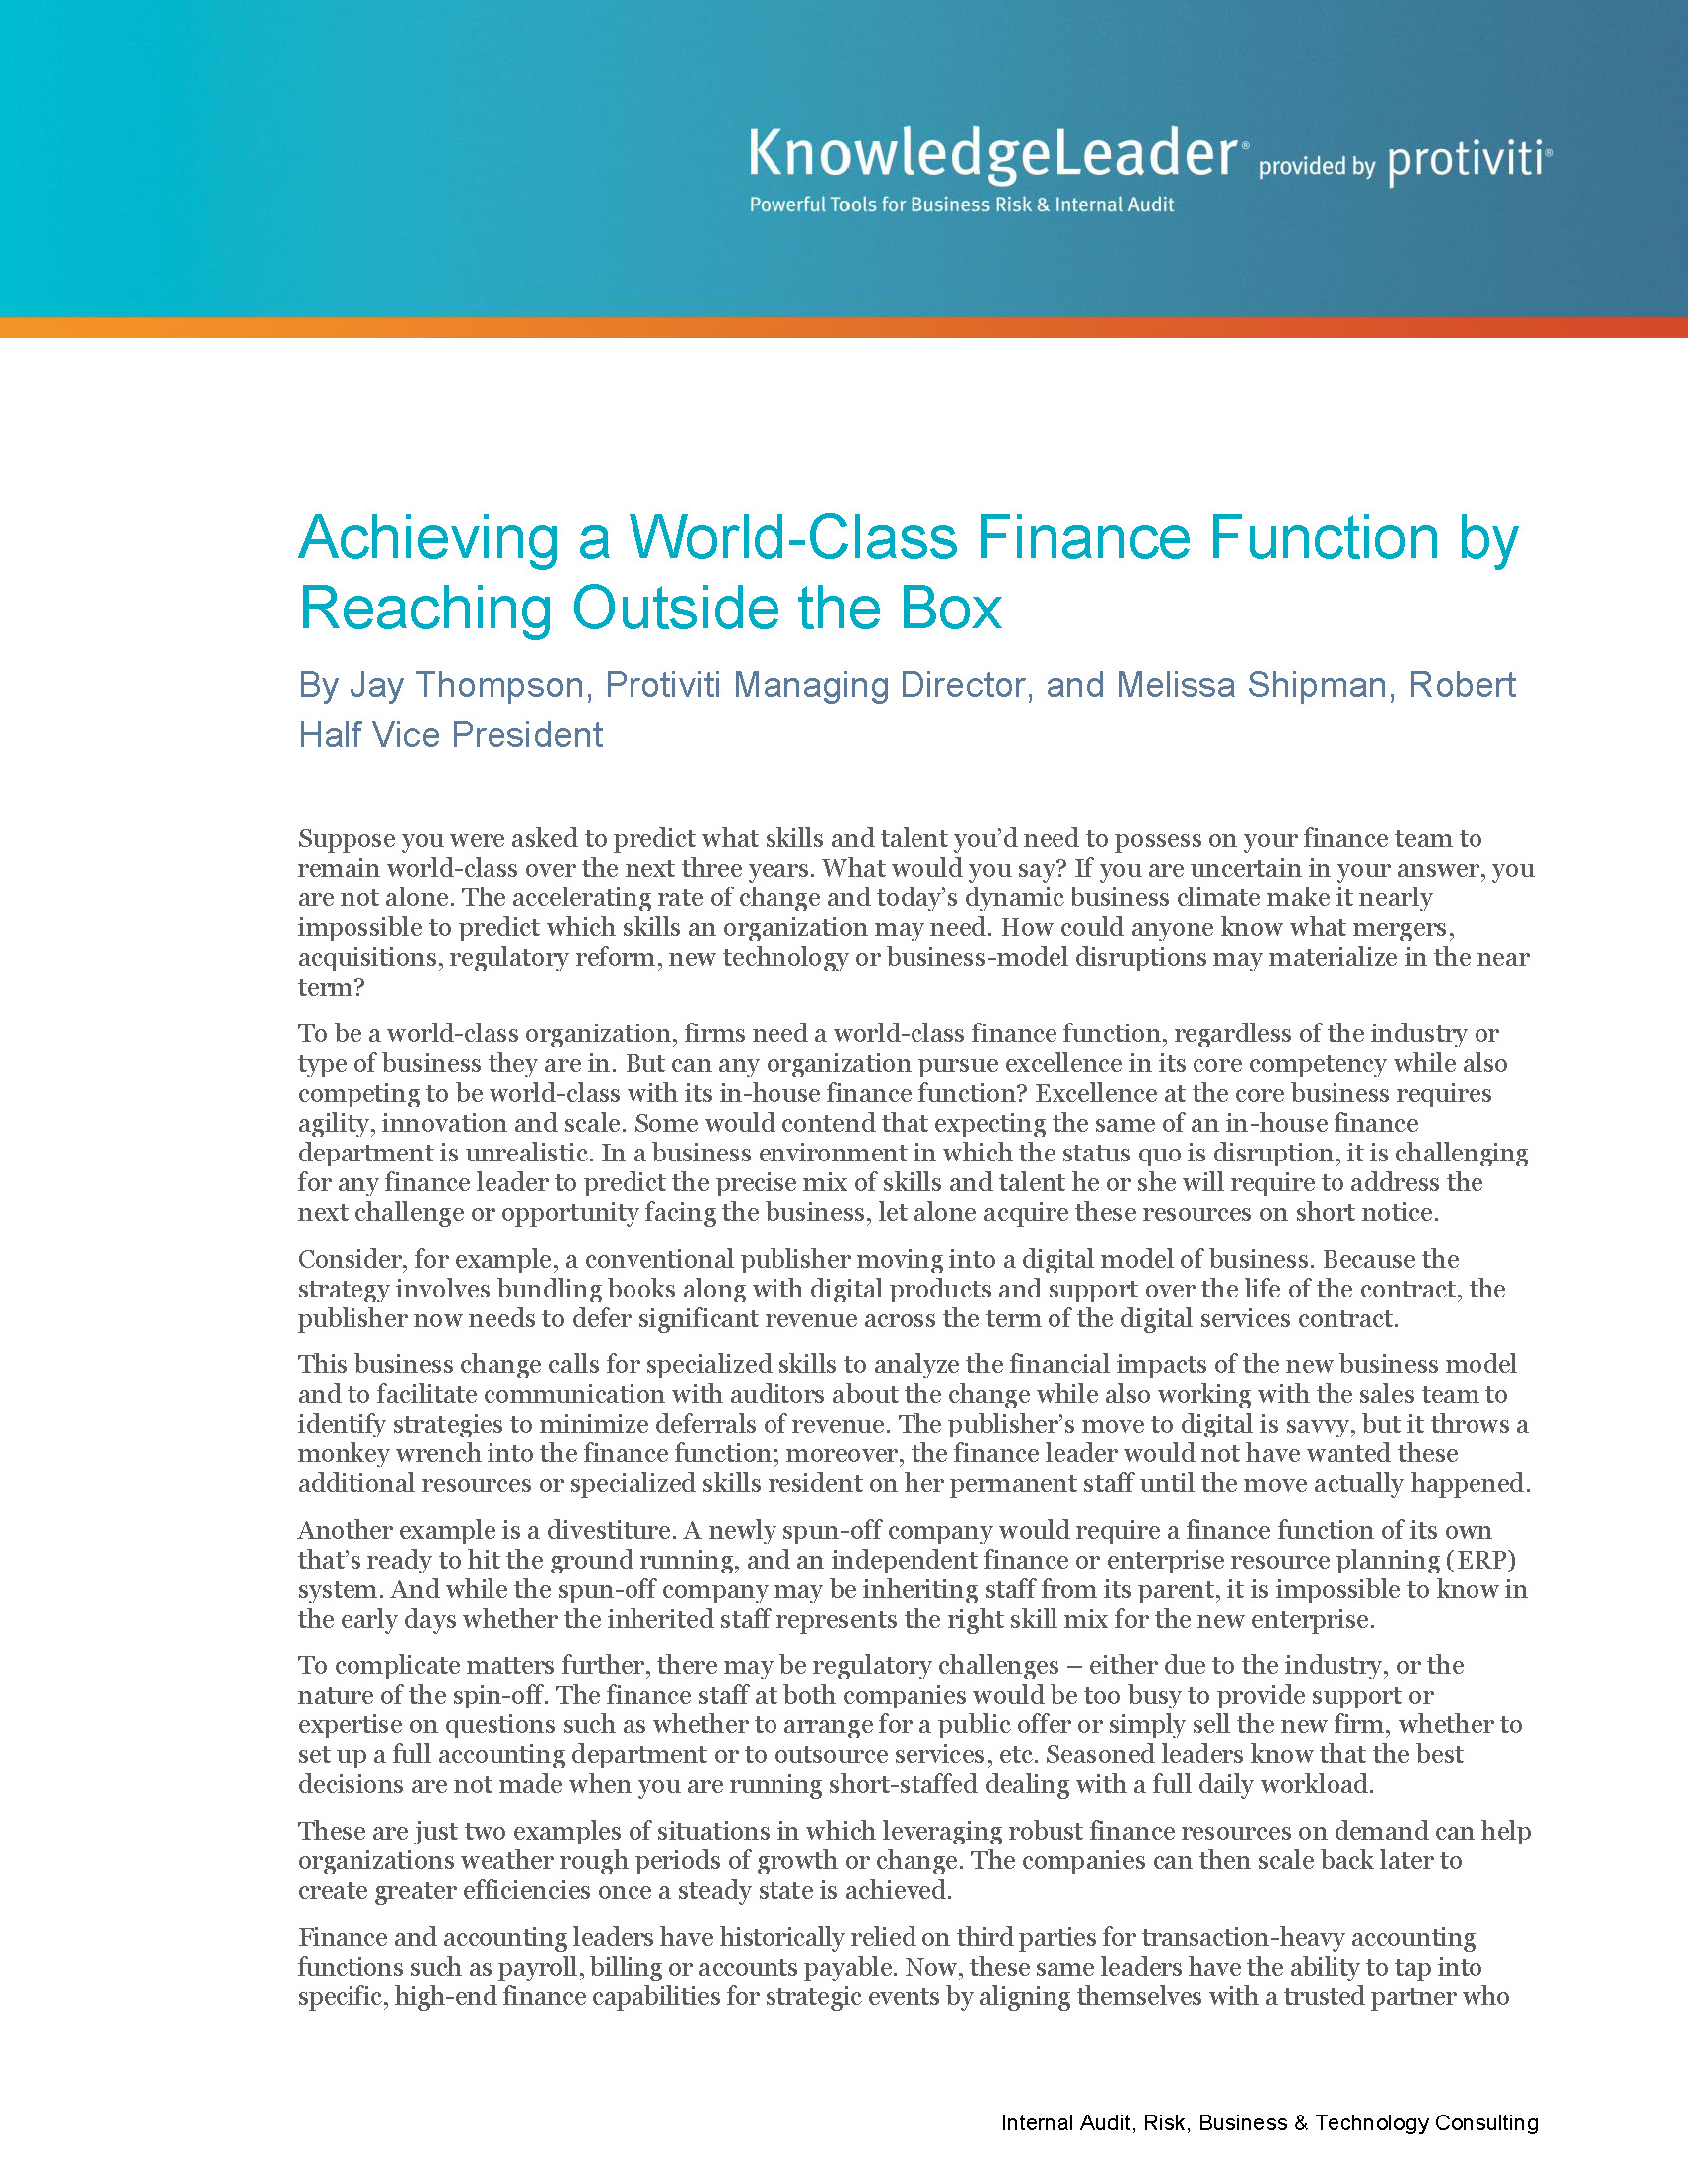 Screenshot of the first page of Achieving a World-Class Finance Function by Reaching Outside the Box